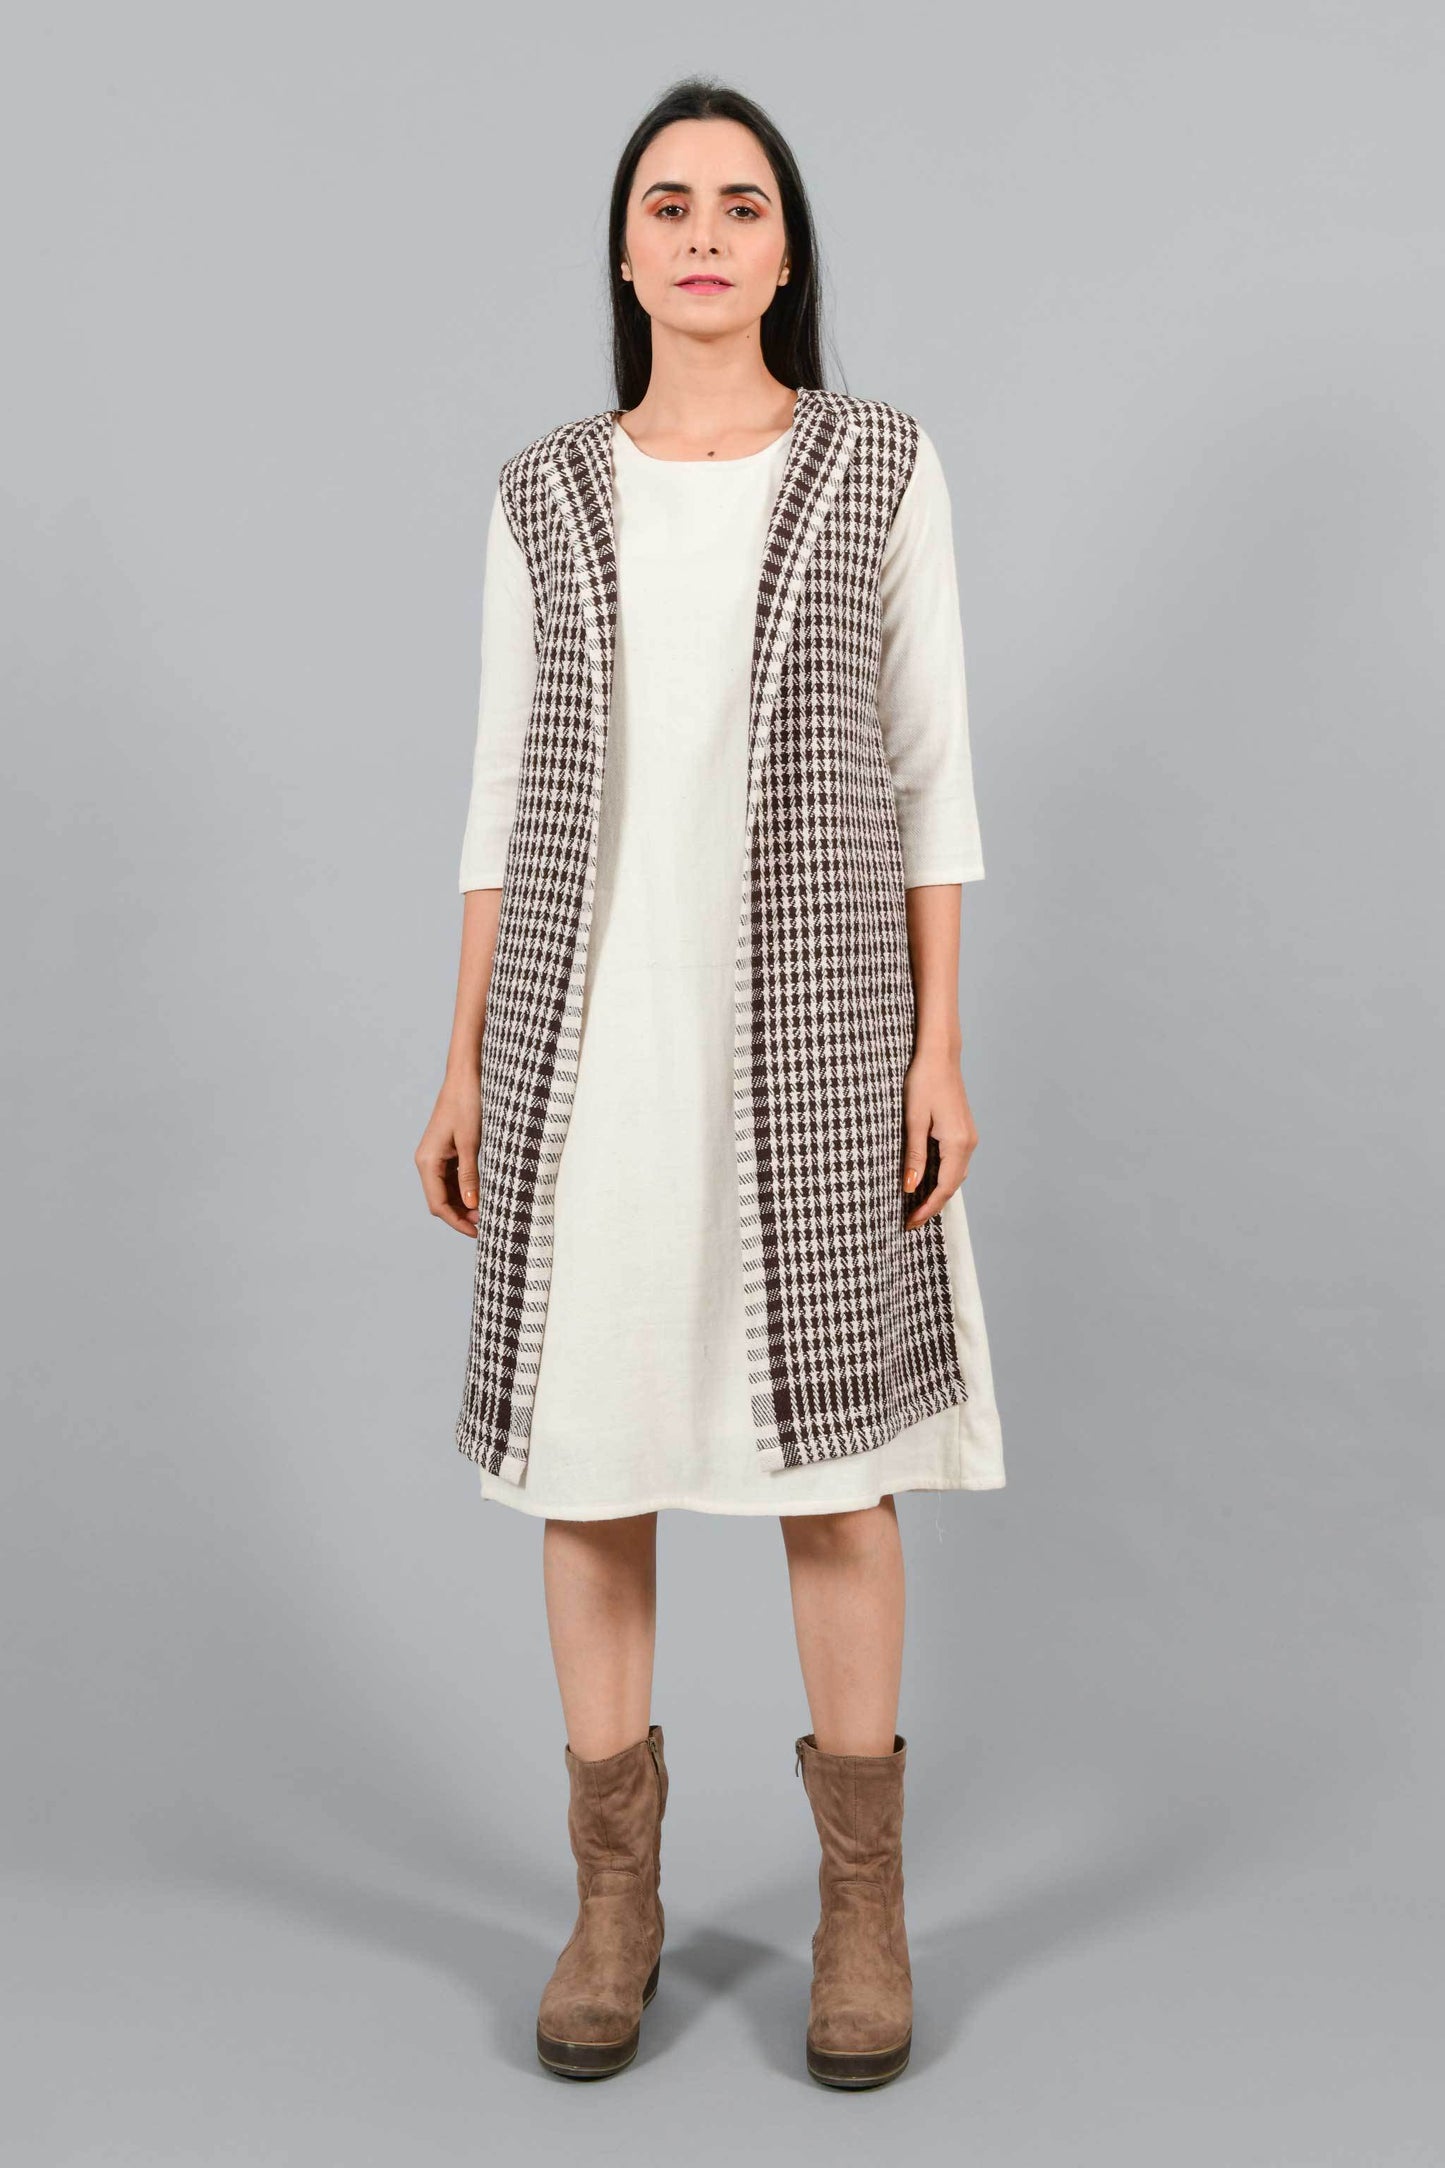 Front pose of an Indian Womenswear female model wearing Kora Brown handspun and handwoven khadi long Jacket over an off-white cashmere cotton dress by Cotton Rack.